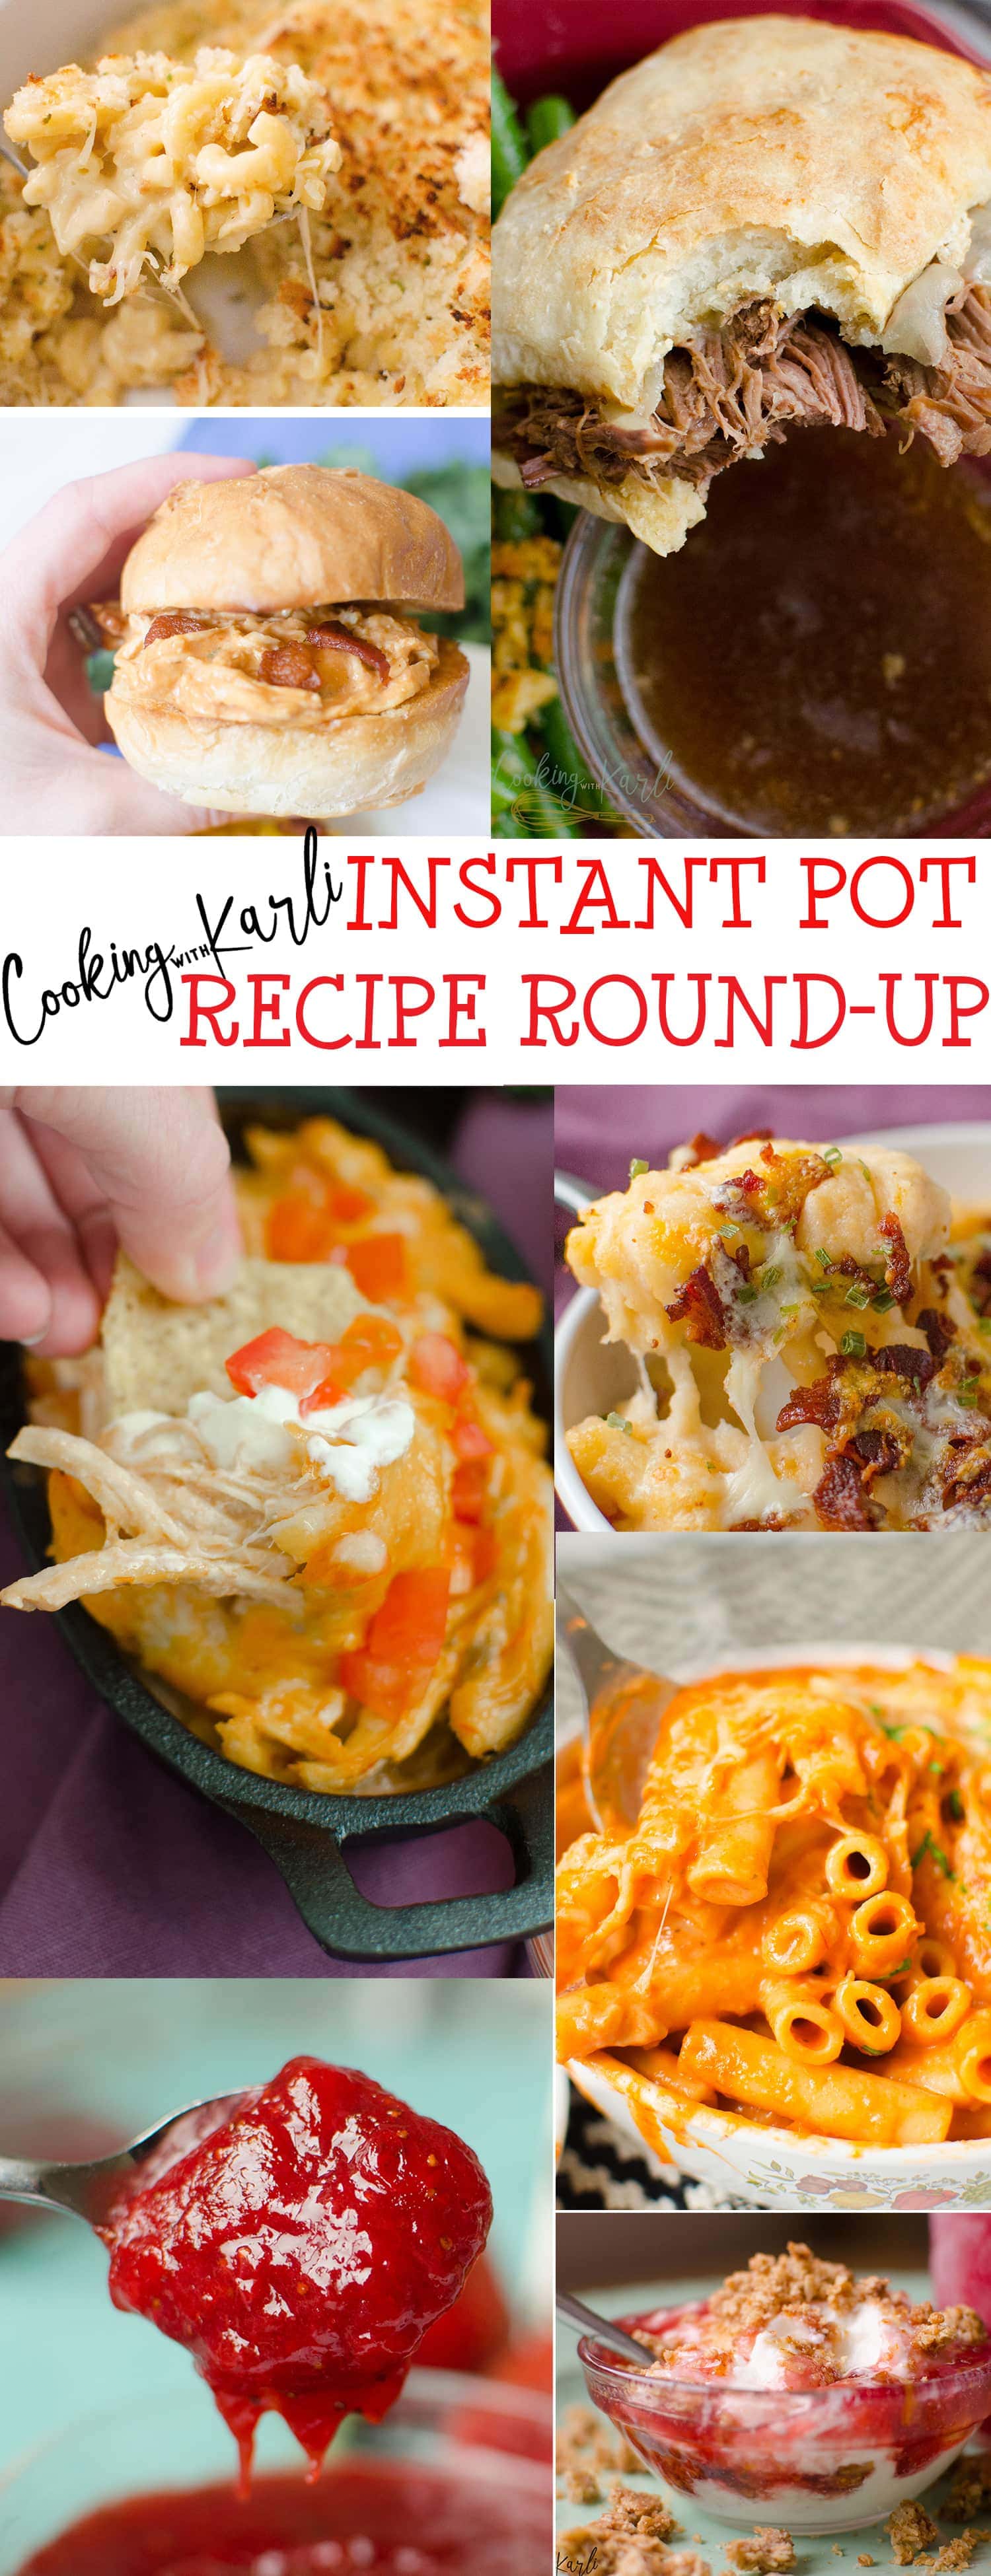 Instant Pot Recipe Round-Up is a compilation of my Instant Pot Recipes all in one place! Browse through and find a new favorite Instant Pot recipe! -Cooking with Karli- #instantpot #recipe #roundup #dinner #maindish #fast #easy